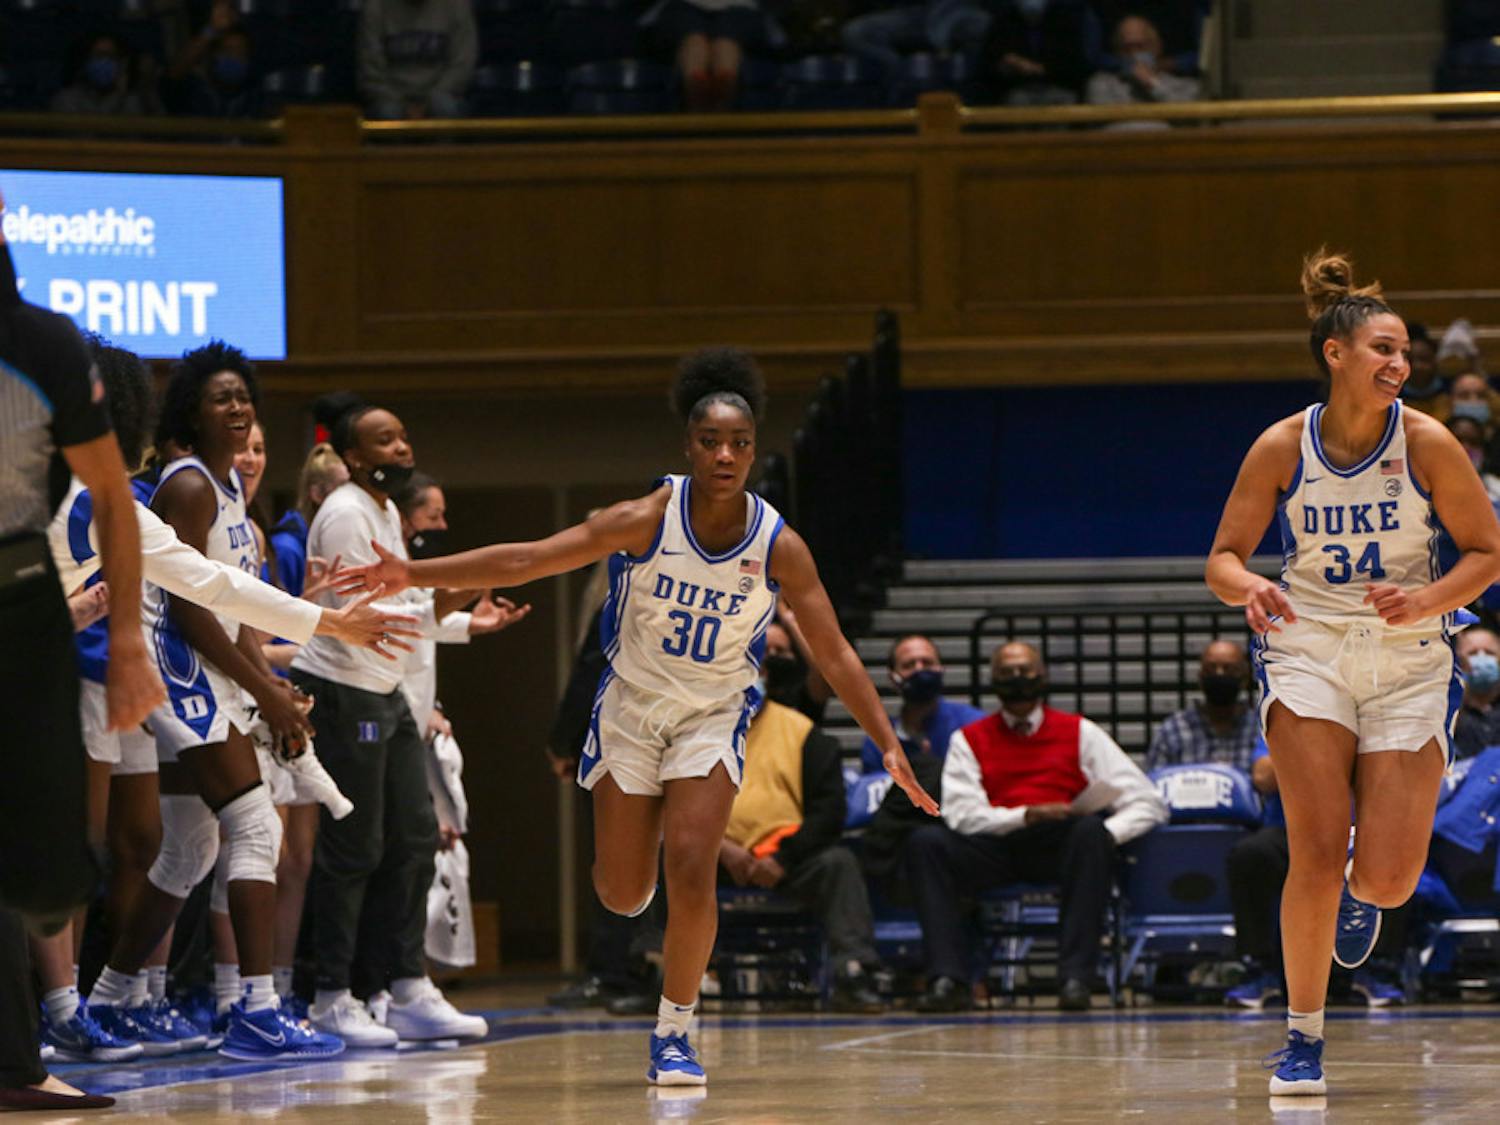 Freshman Shayeann Day-Wilson knocked down three 3-pointers and had 14 points through the first three quarters.